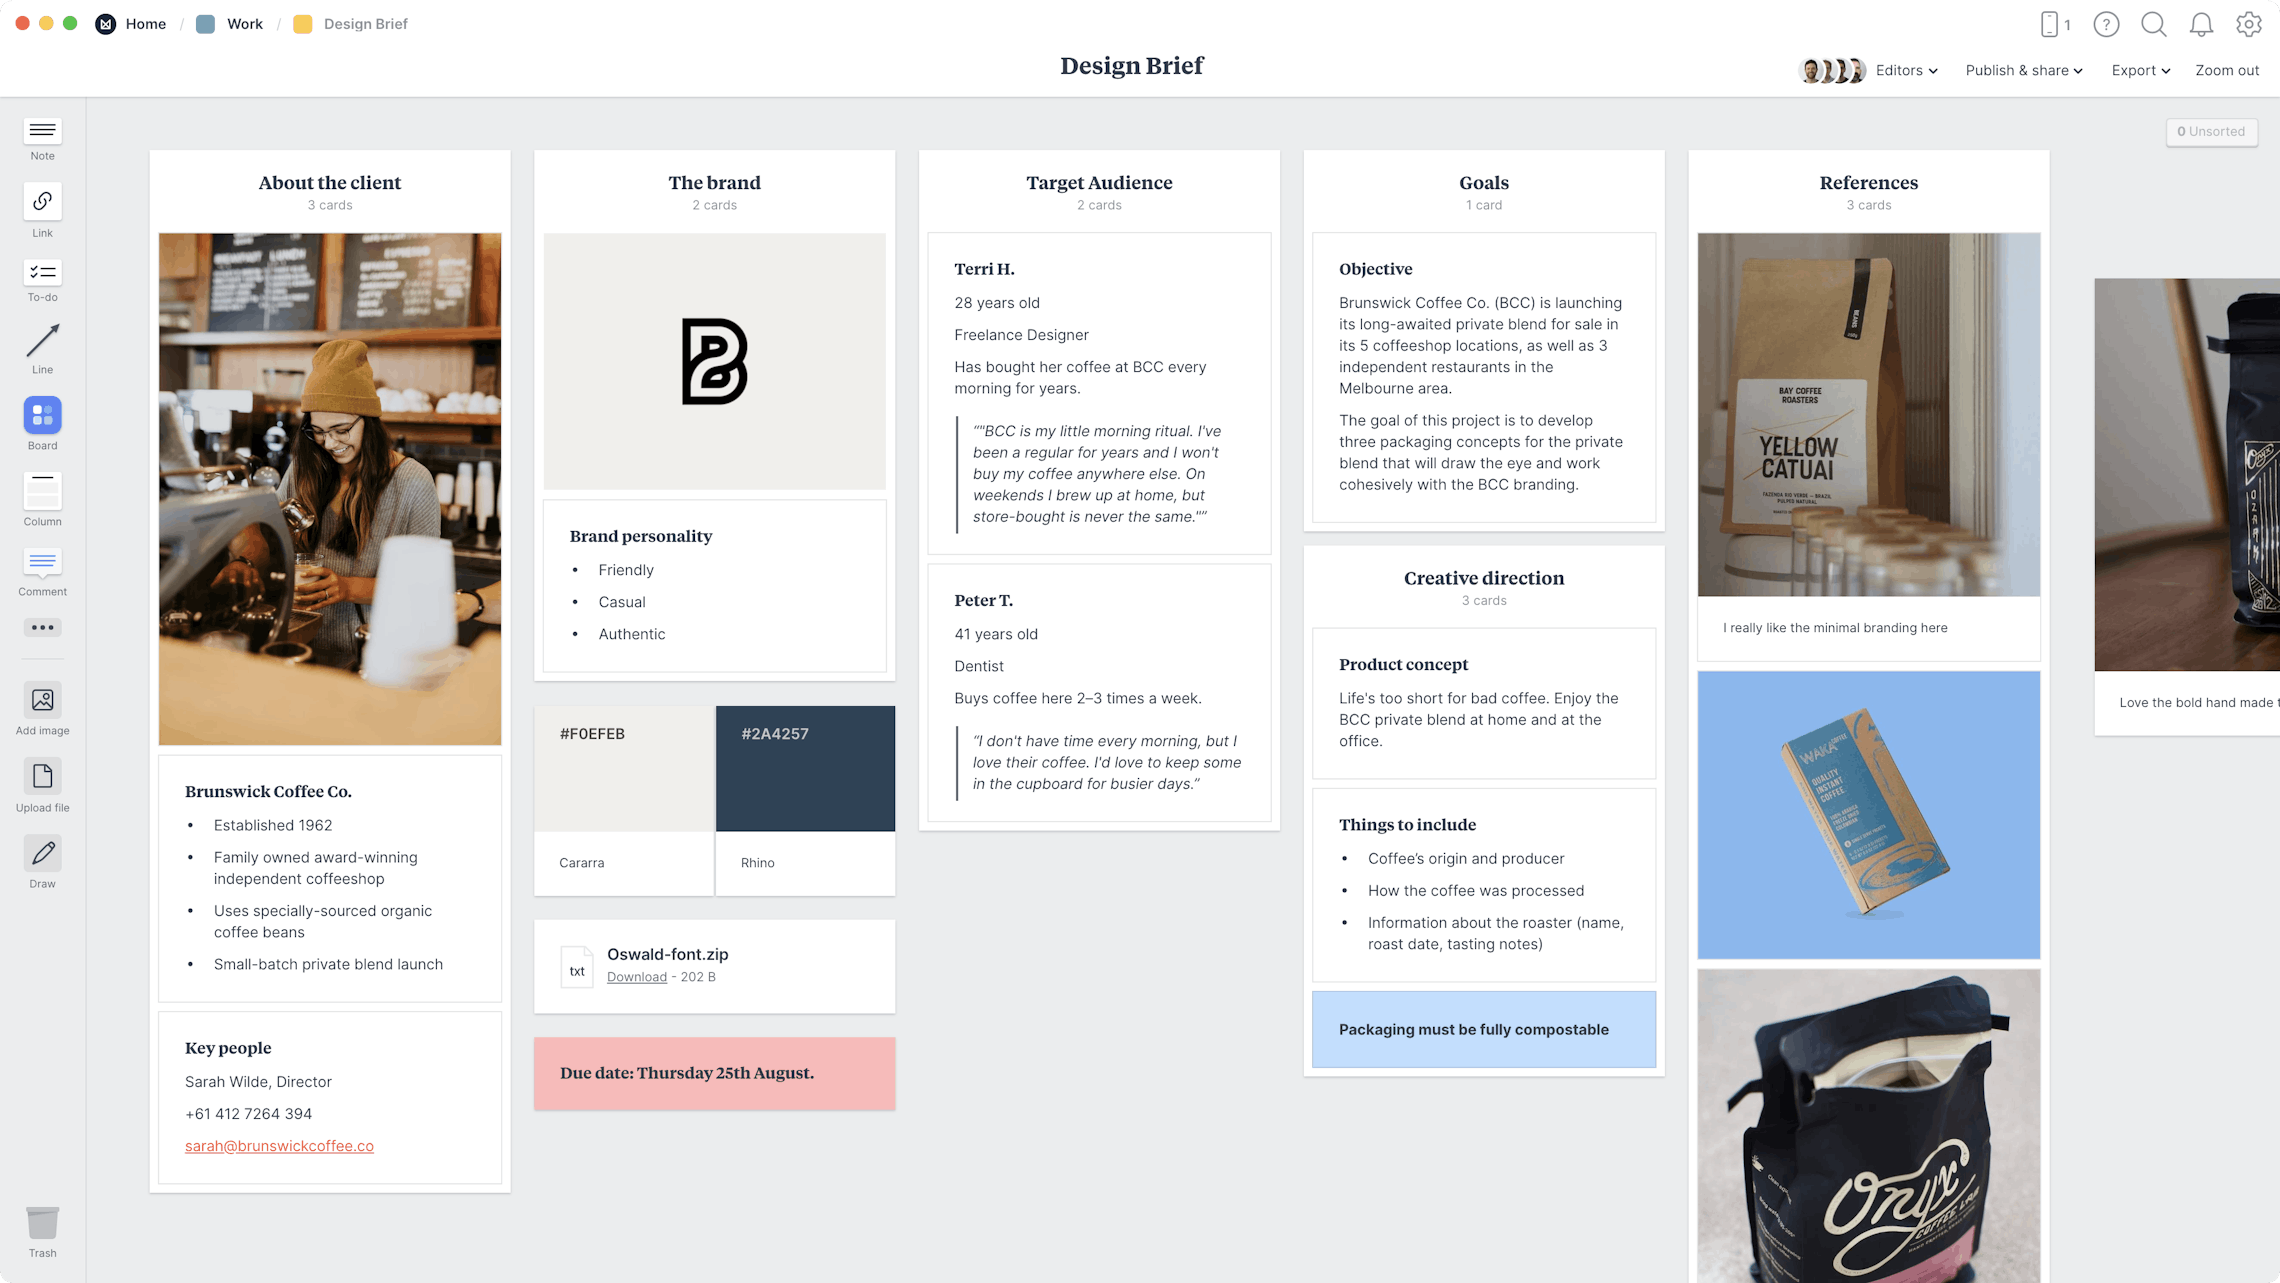 Design Brief Template, within the Milanote app